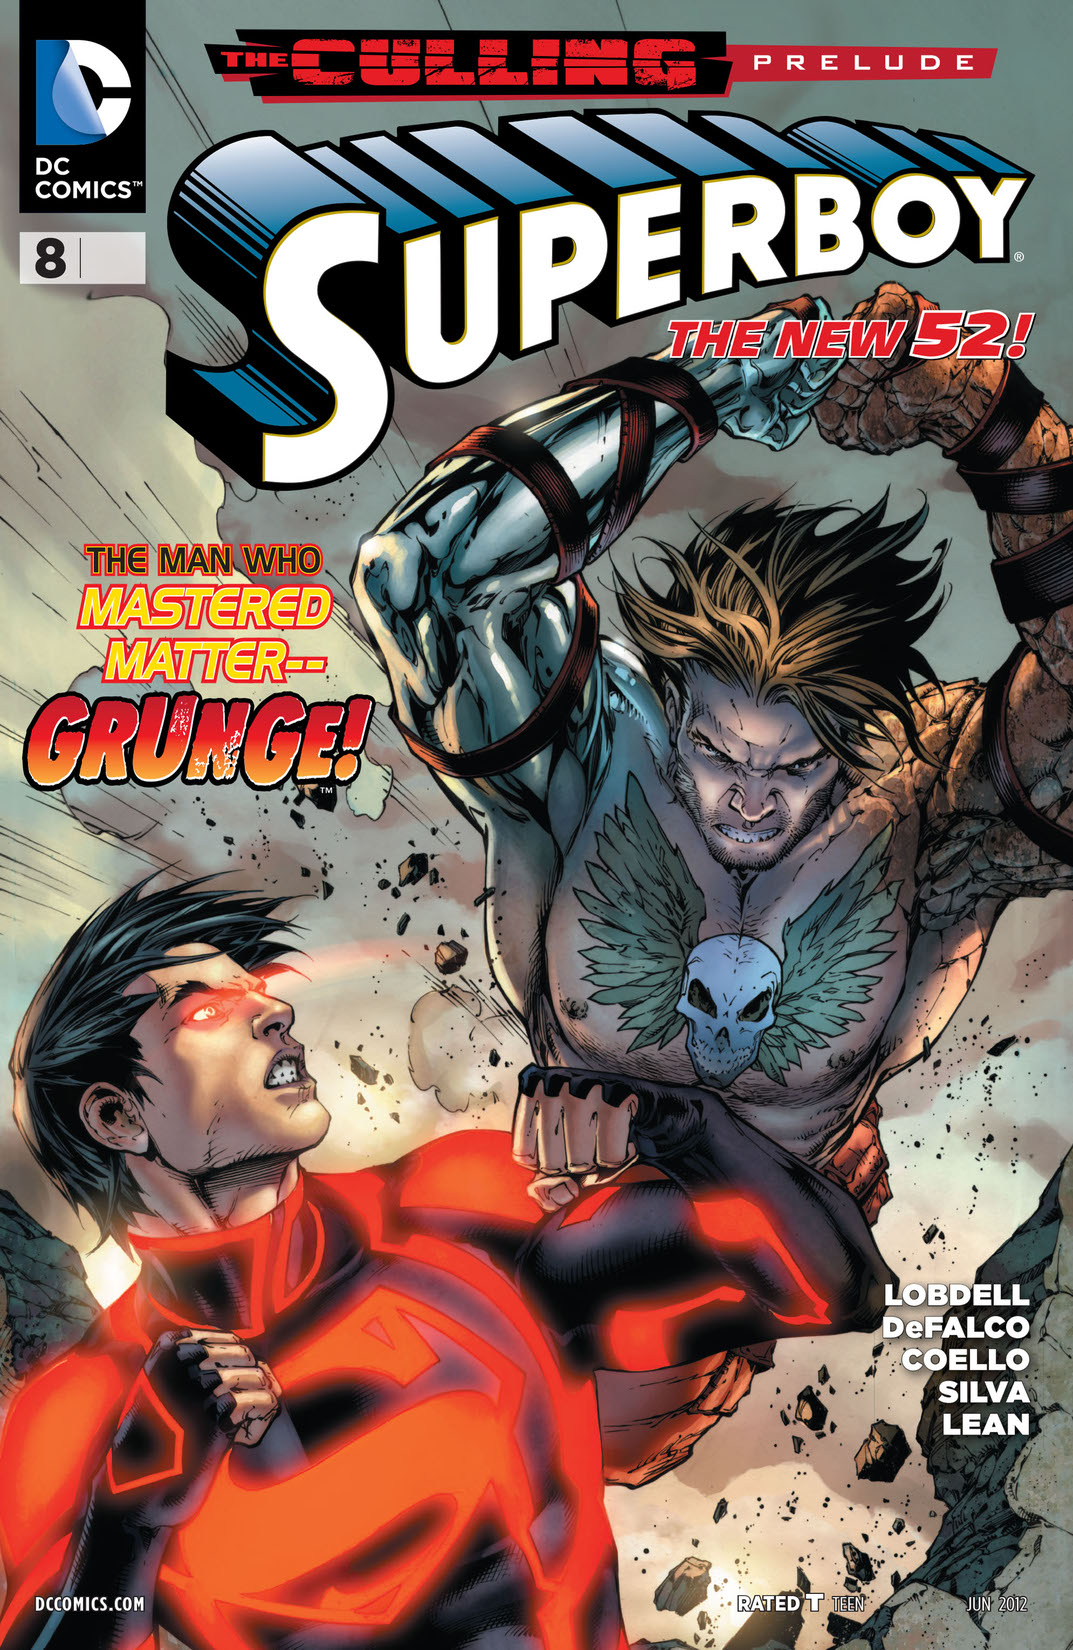 Superboy (2011-) #8 preview images